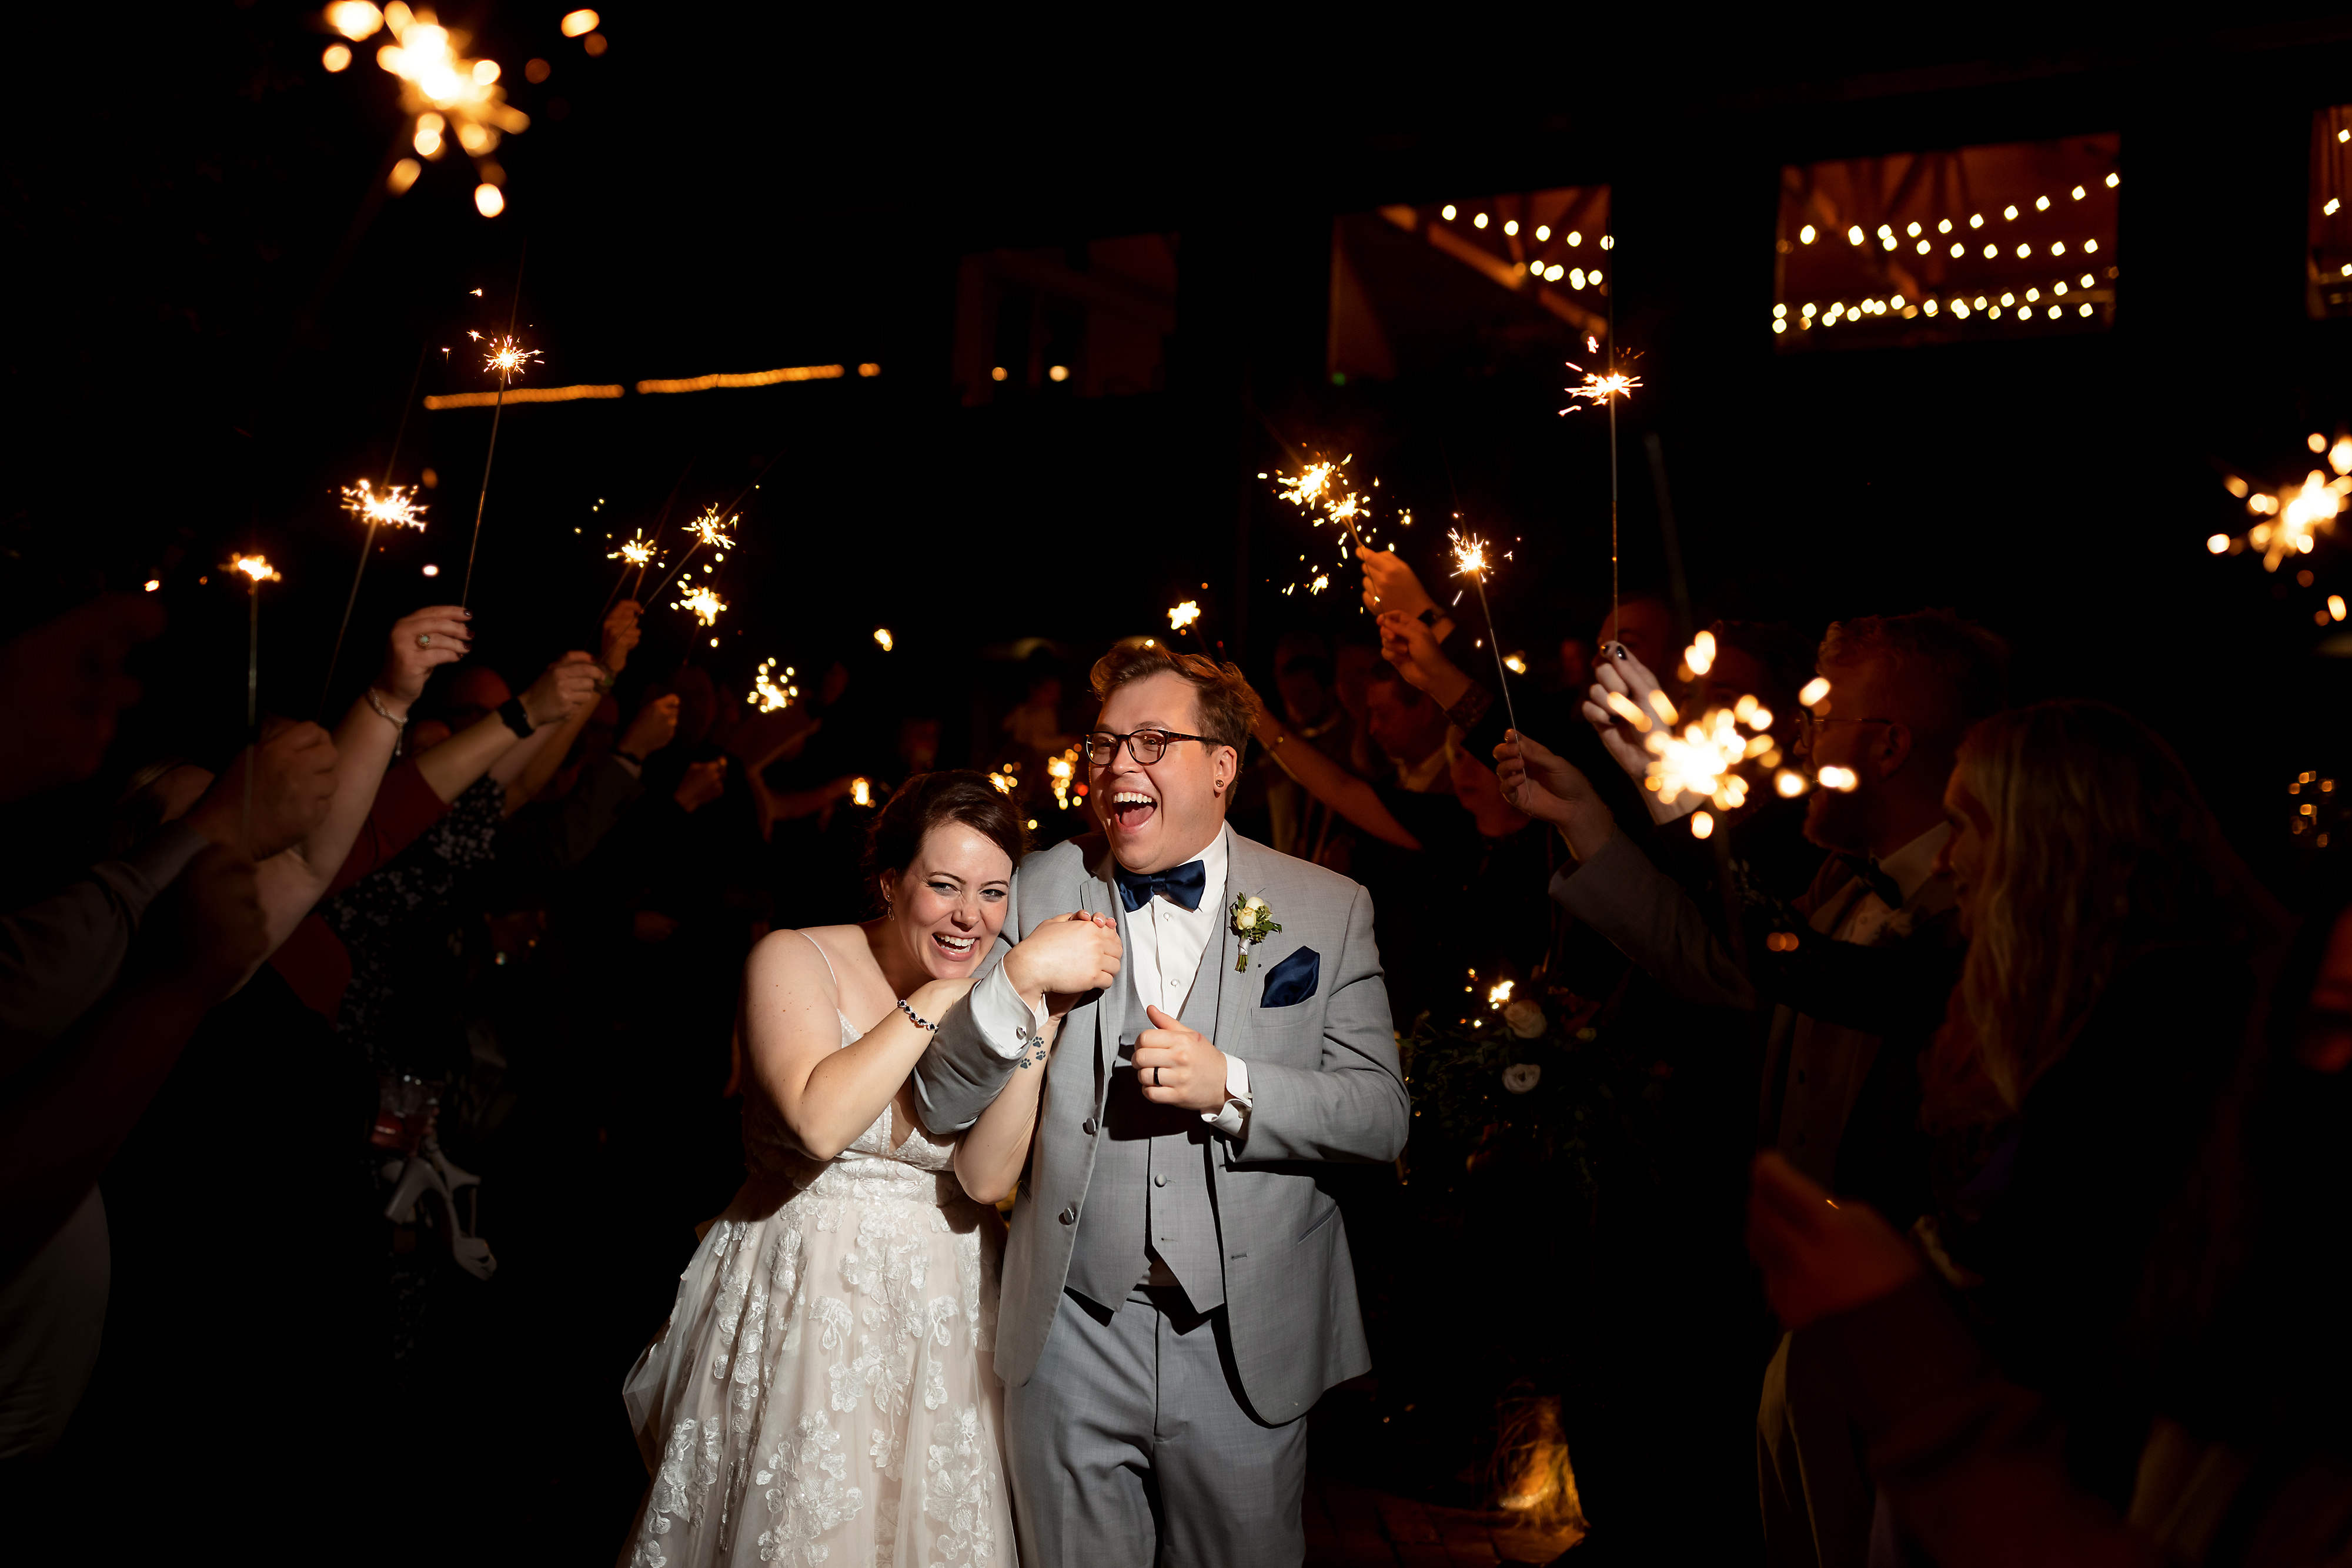 Bride and groom sparkler exit at the end of wedding reception at Fishermen's Inn in Elburn Illinois